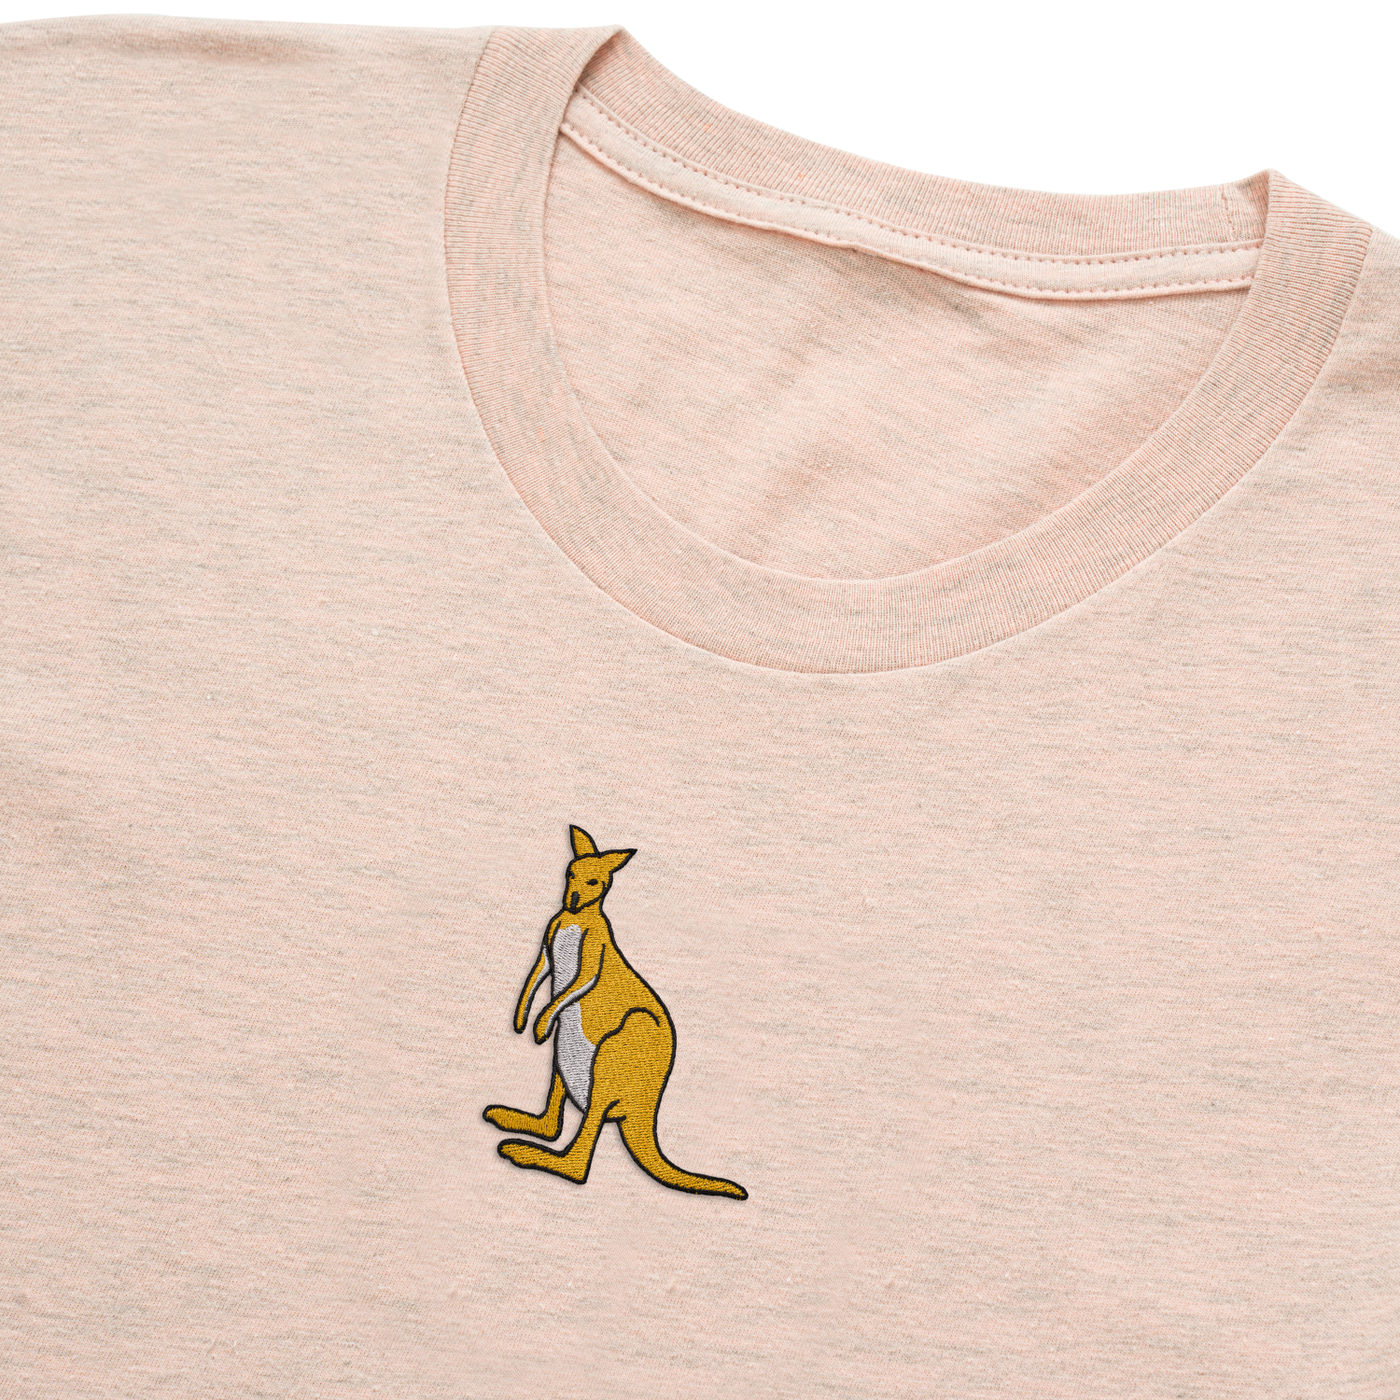 Bobby's Planet Women's Embroidered Kangaroo T-Shirt from Australia Down Under Animals Collection in Heather Prism Peach Color#color_heather-prism-peach